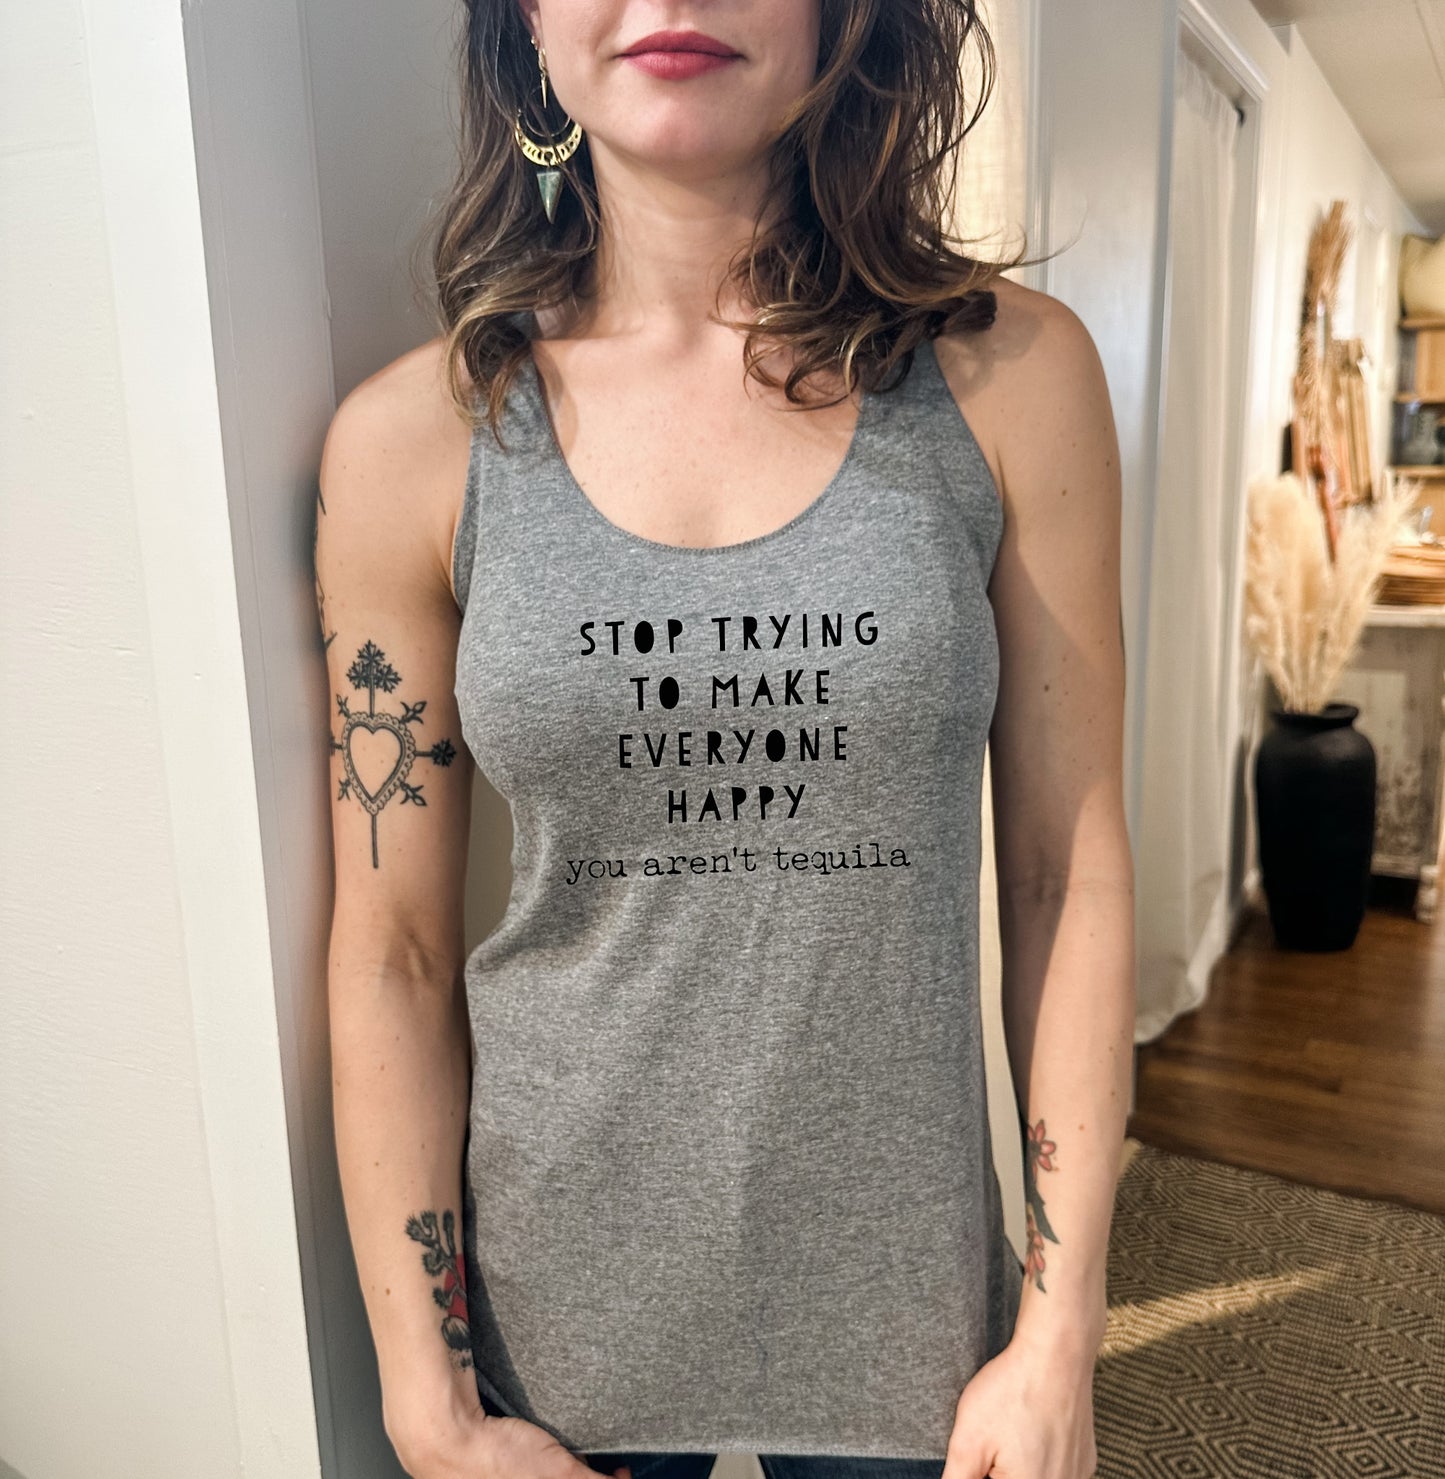 Stop Trying To Make Everyone Happy... You Aren't Tequila - Women's Tank - Heather Gray, Tahiti, or Envy